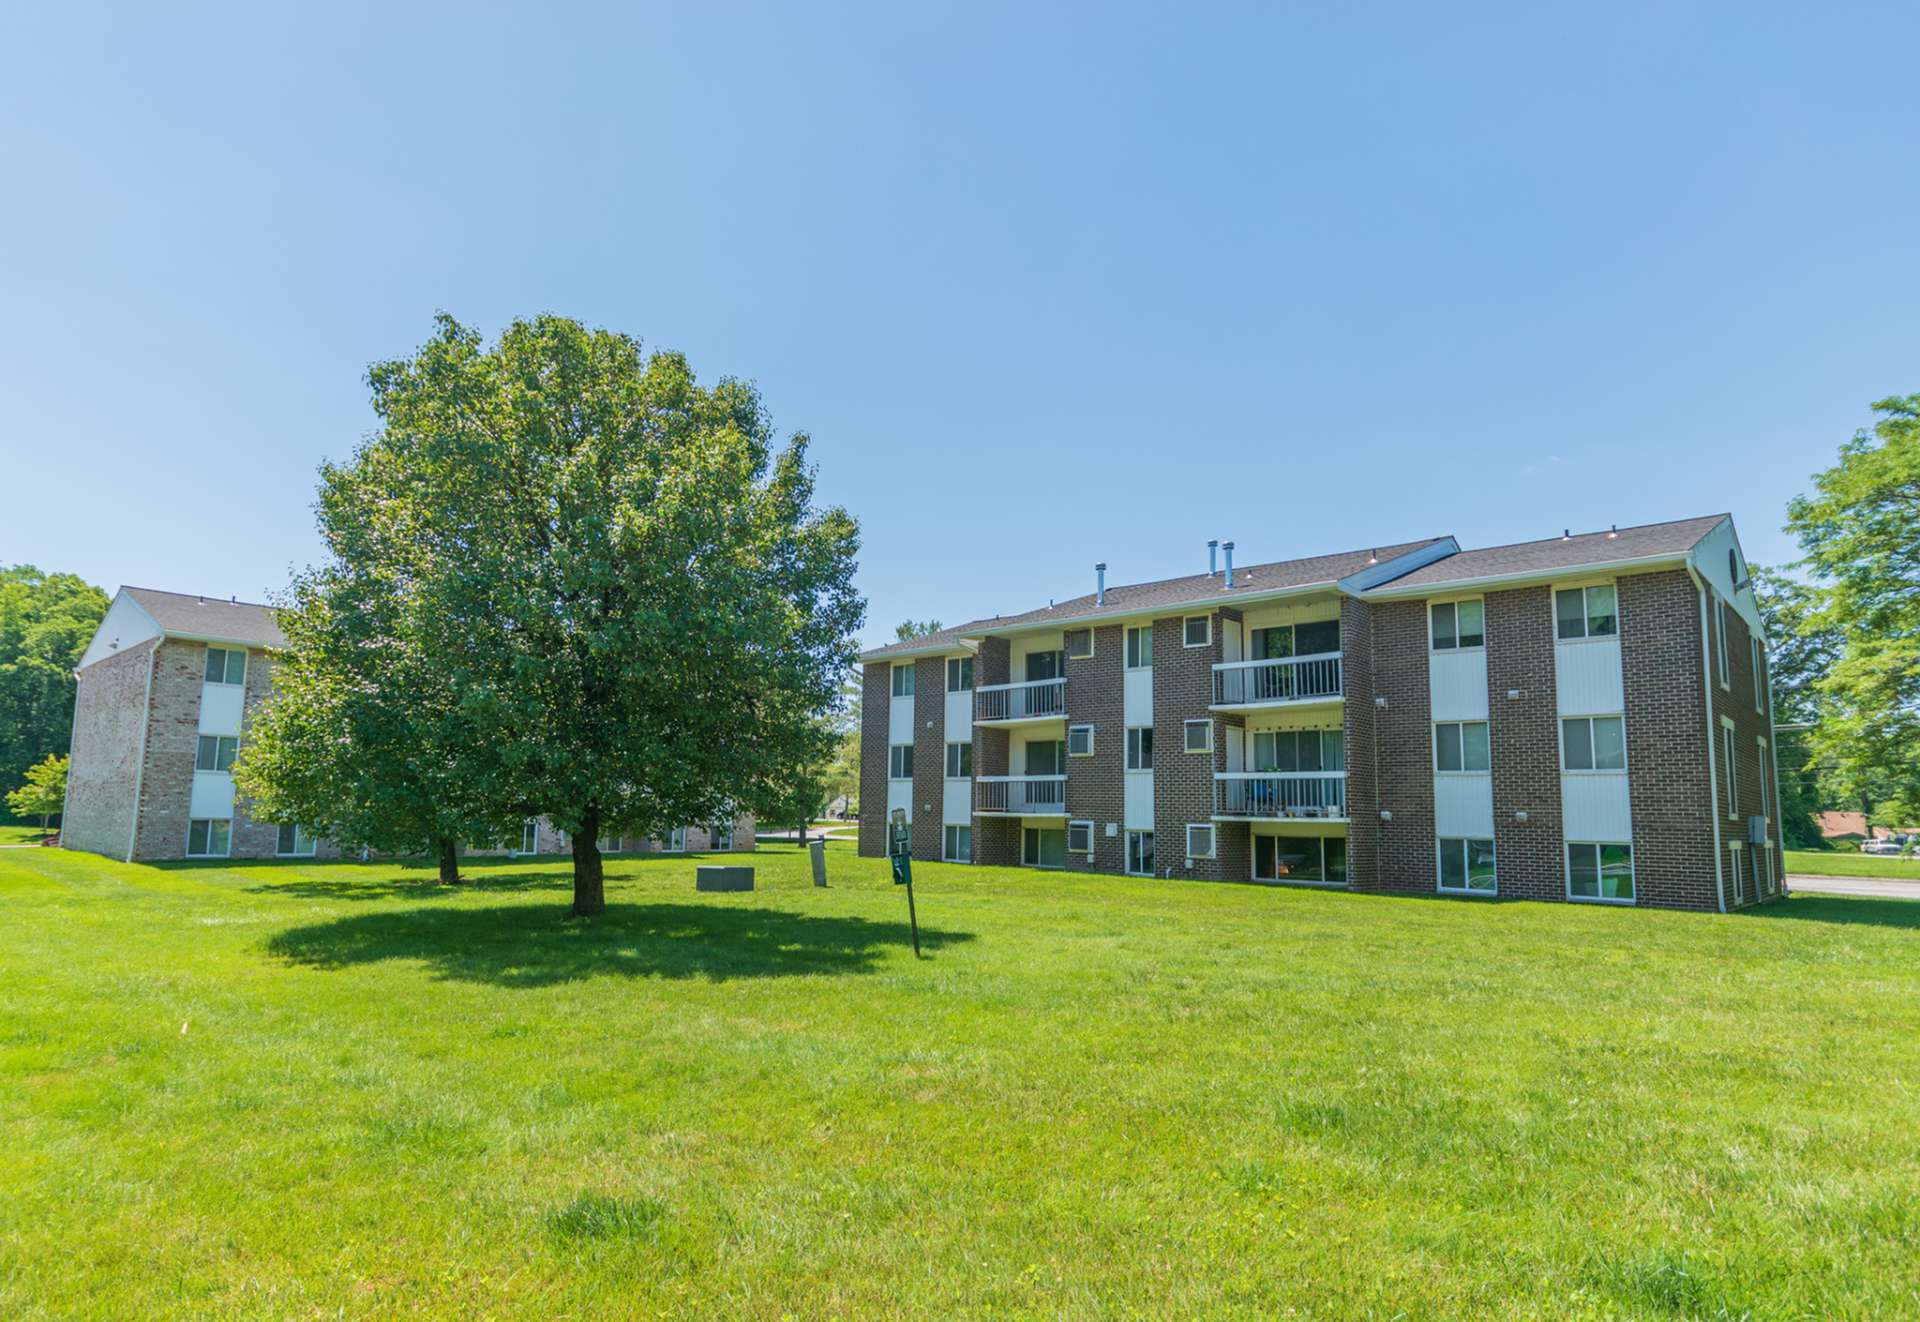 Exterior of an apartment building at Chesapeake Village apartments, fitted with a lawn, and trees